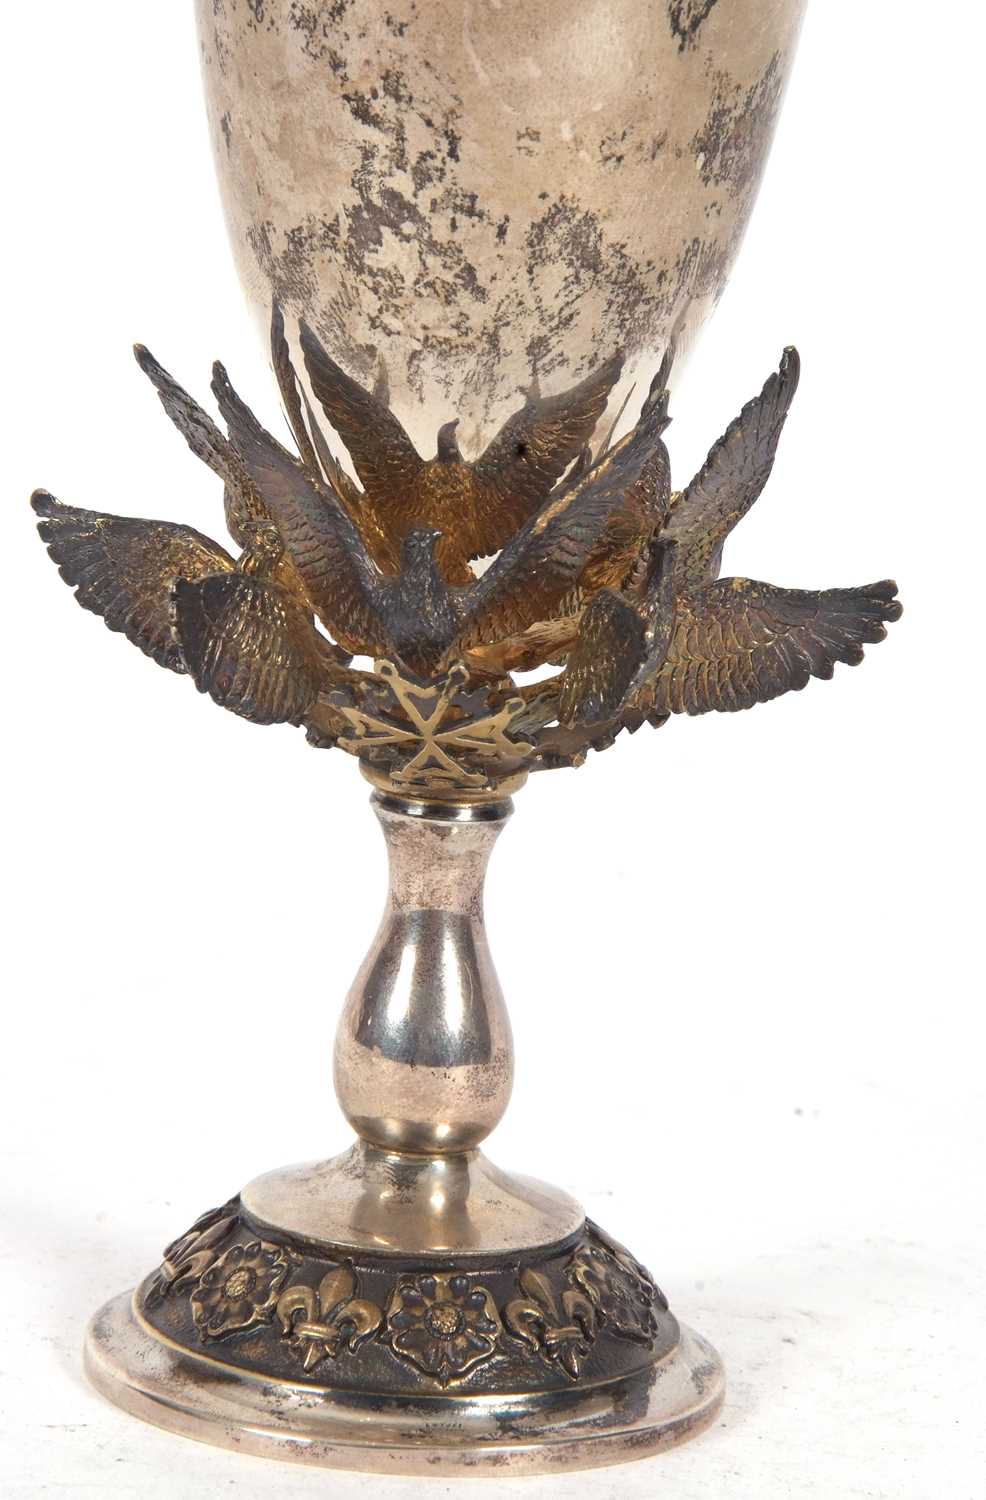 Aurum limited edition silver gilt goblet hallmarked for London 1986 produced to commemorate The - Image 5 of 7